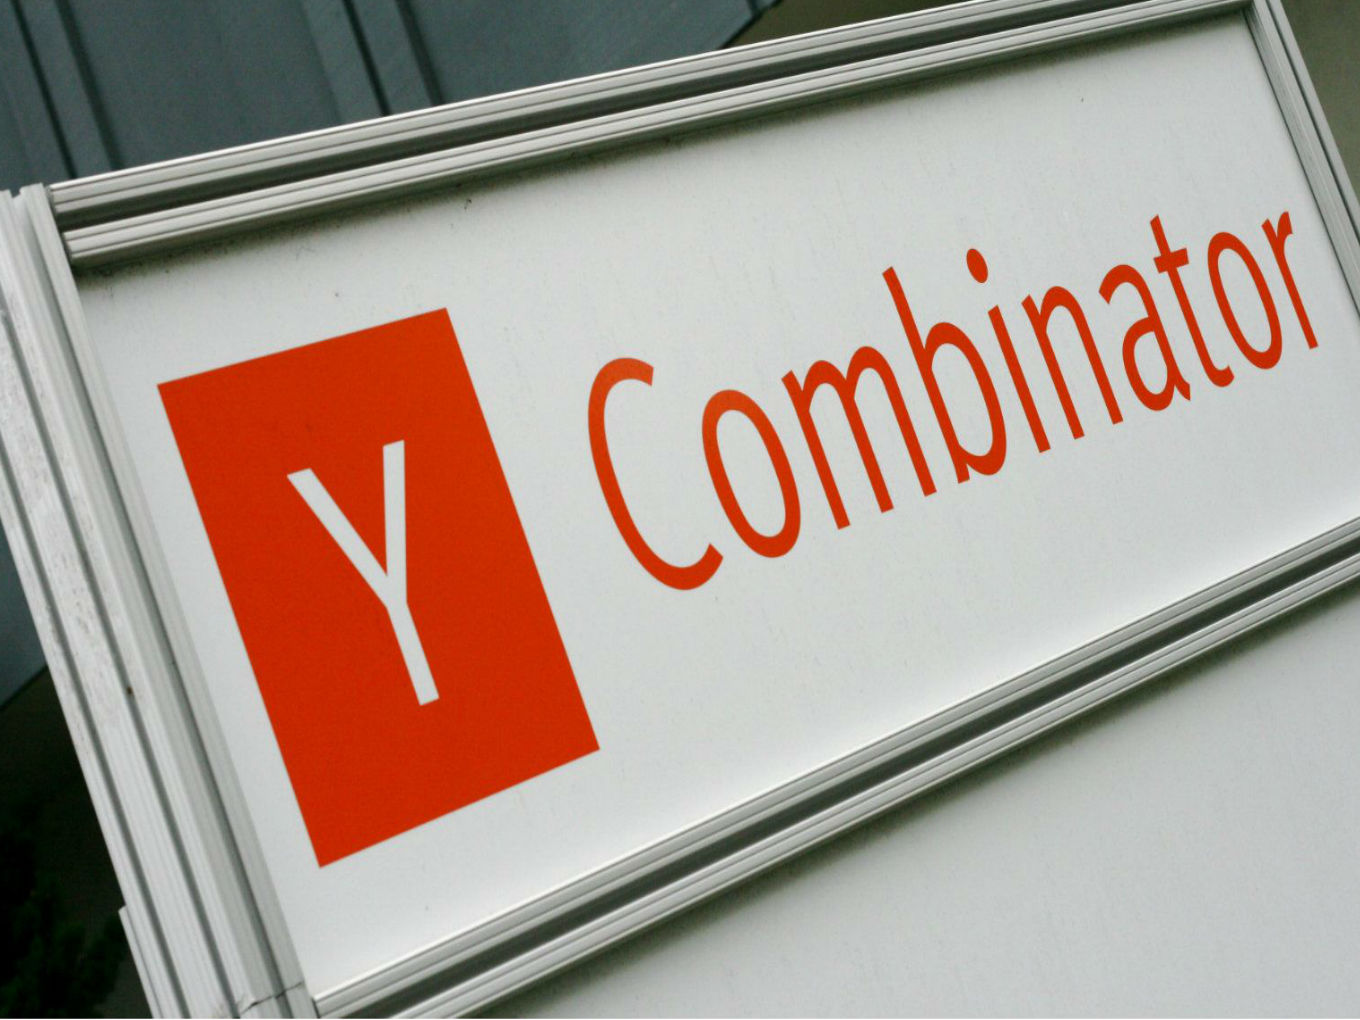 Y Combinator Invests In ZiffyHomes, Selected For Demo Day In Valley-Y Combinator Backs Former Housing Cofounder’s Smart SMS App Kyte.ai